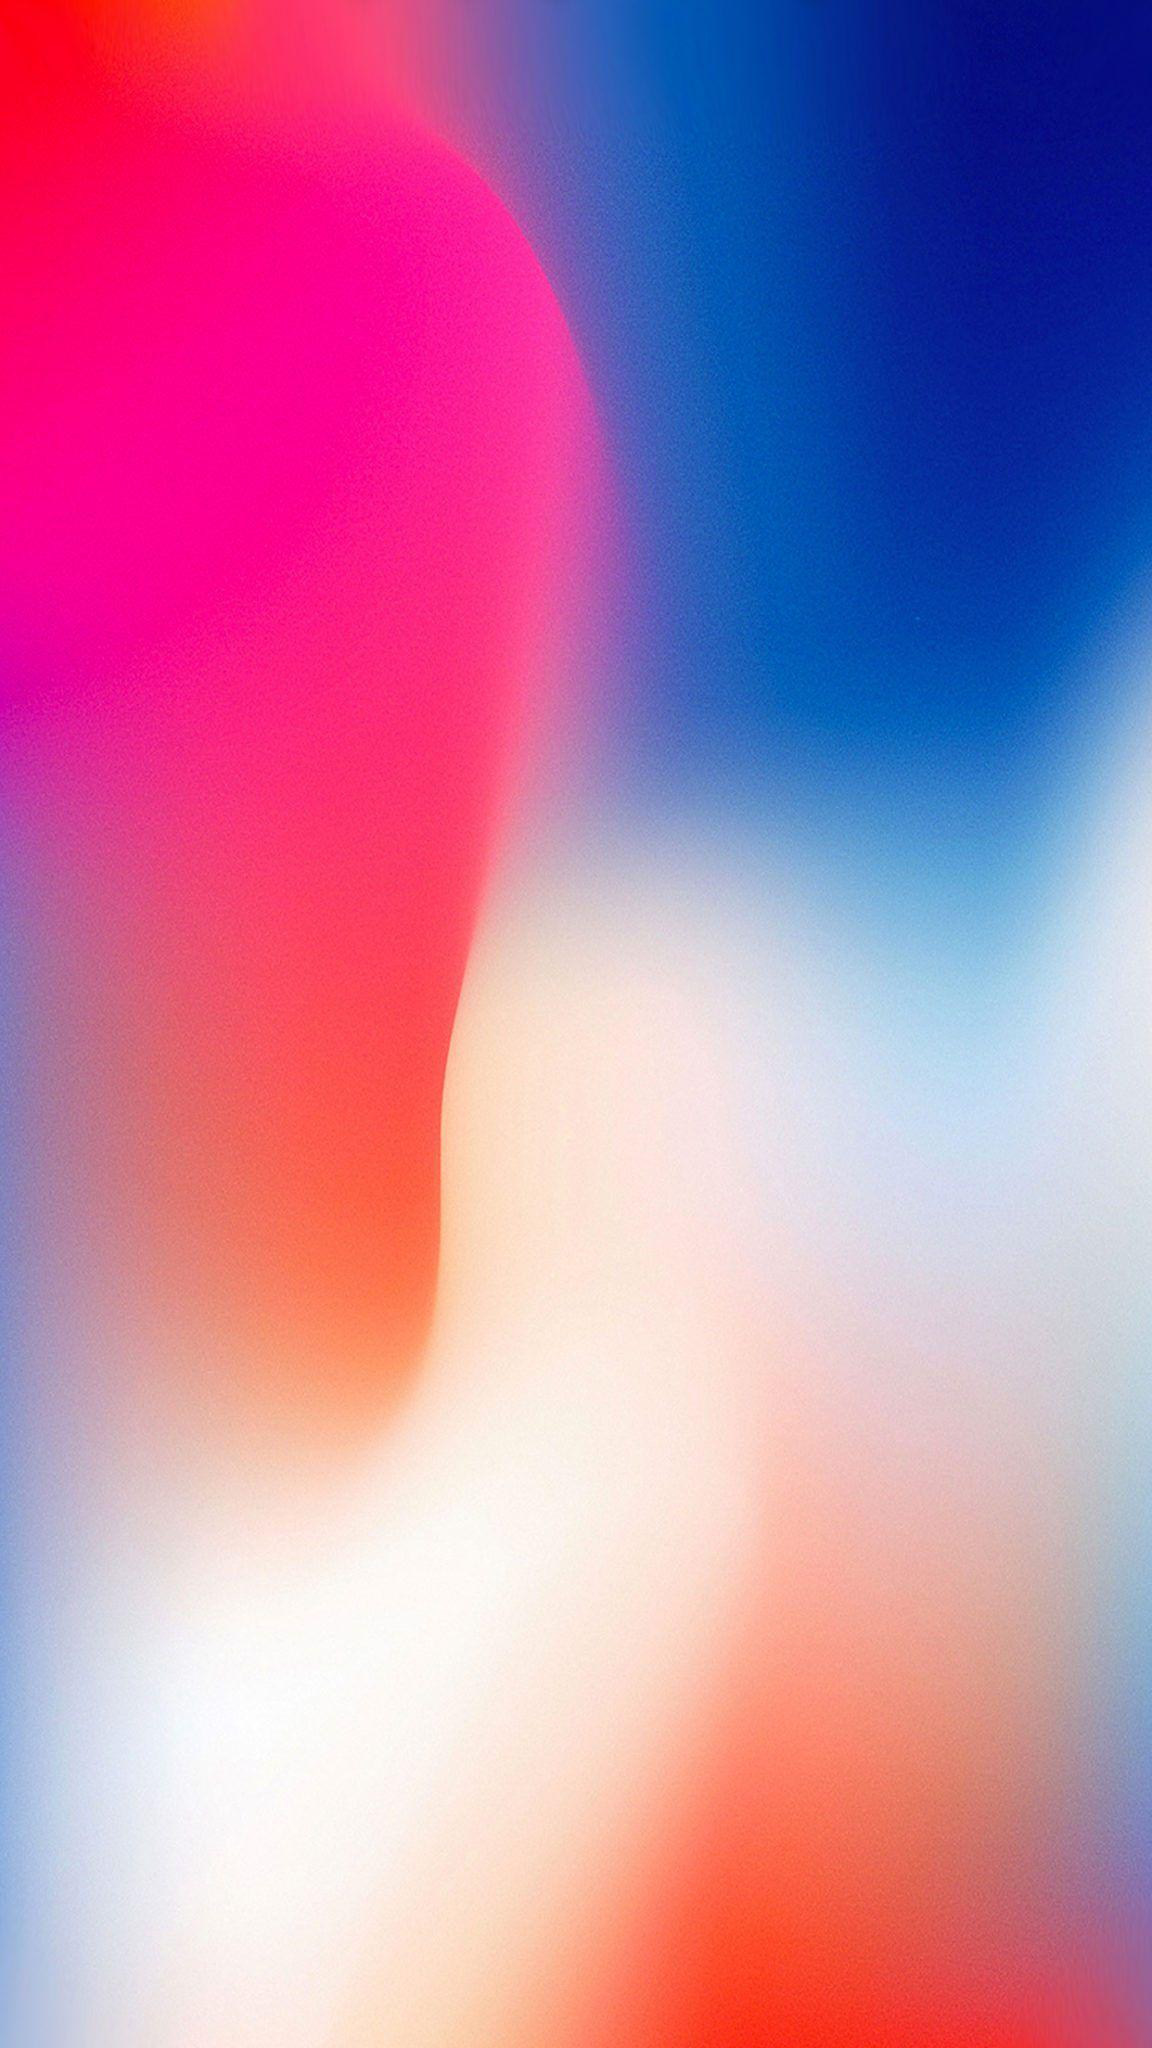 Download Apple iPhone X Stock Wallpaper for your Device